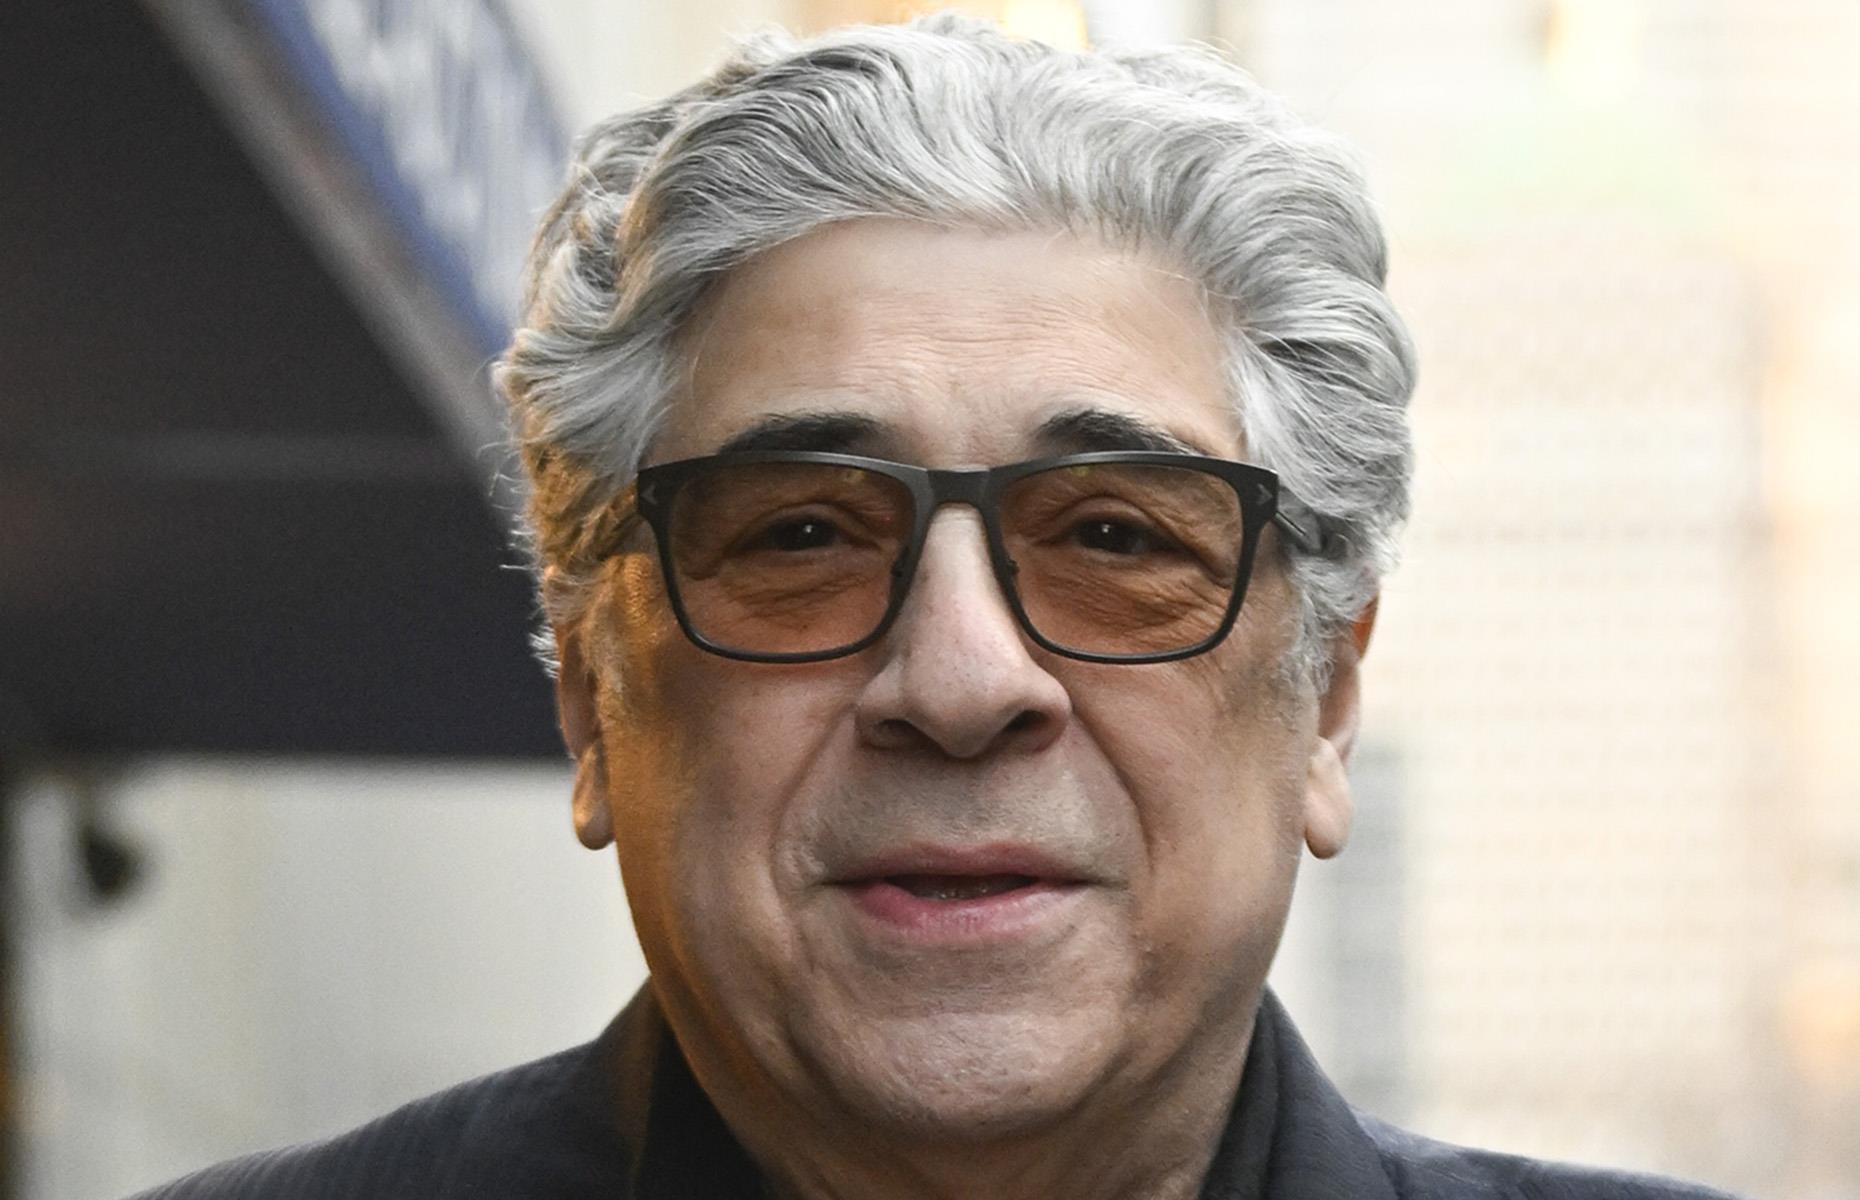 <p>While Salvatore Bonpensiero remains his most iconic role, Pastore has found many other projects to sink his teeth into over the years.</p>  <p>His silver screen credits include the star-studded crime comedy <em>The Family</em> and, most recently, the 2023 biographical drama <em>Spinning Gold.</em> He’s continued to grace the small screen too, appearing in the mafia series <em>Gravesend</em> in 2021.</p>  <p>Outside of showbiz, he owns the food business Vincent Pastore’s Italian Sauce, which he founded in 2019 on the 20th anniversary of <em>The Sopranos</em>' launch.</p>  <p>The 77-year-old's hard work over the years has clearly paid off, earning him an estimated total fortune that sits somewhere between $4 million (£3m) and $5.5 million (£4m).</p>